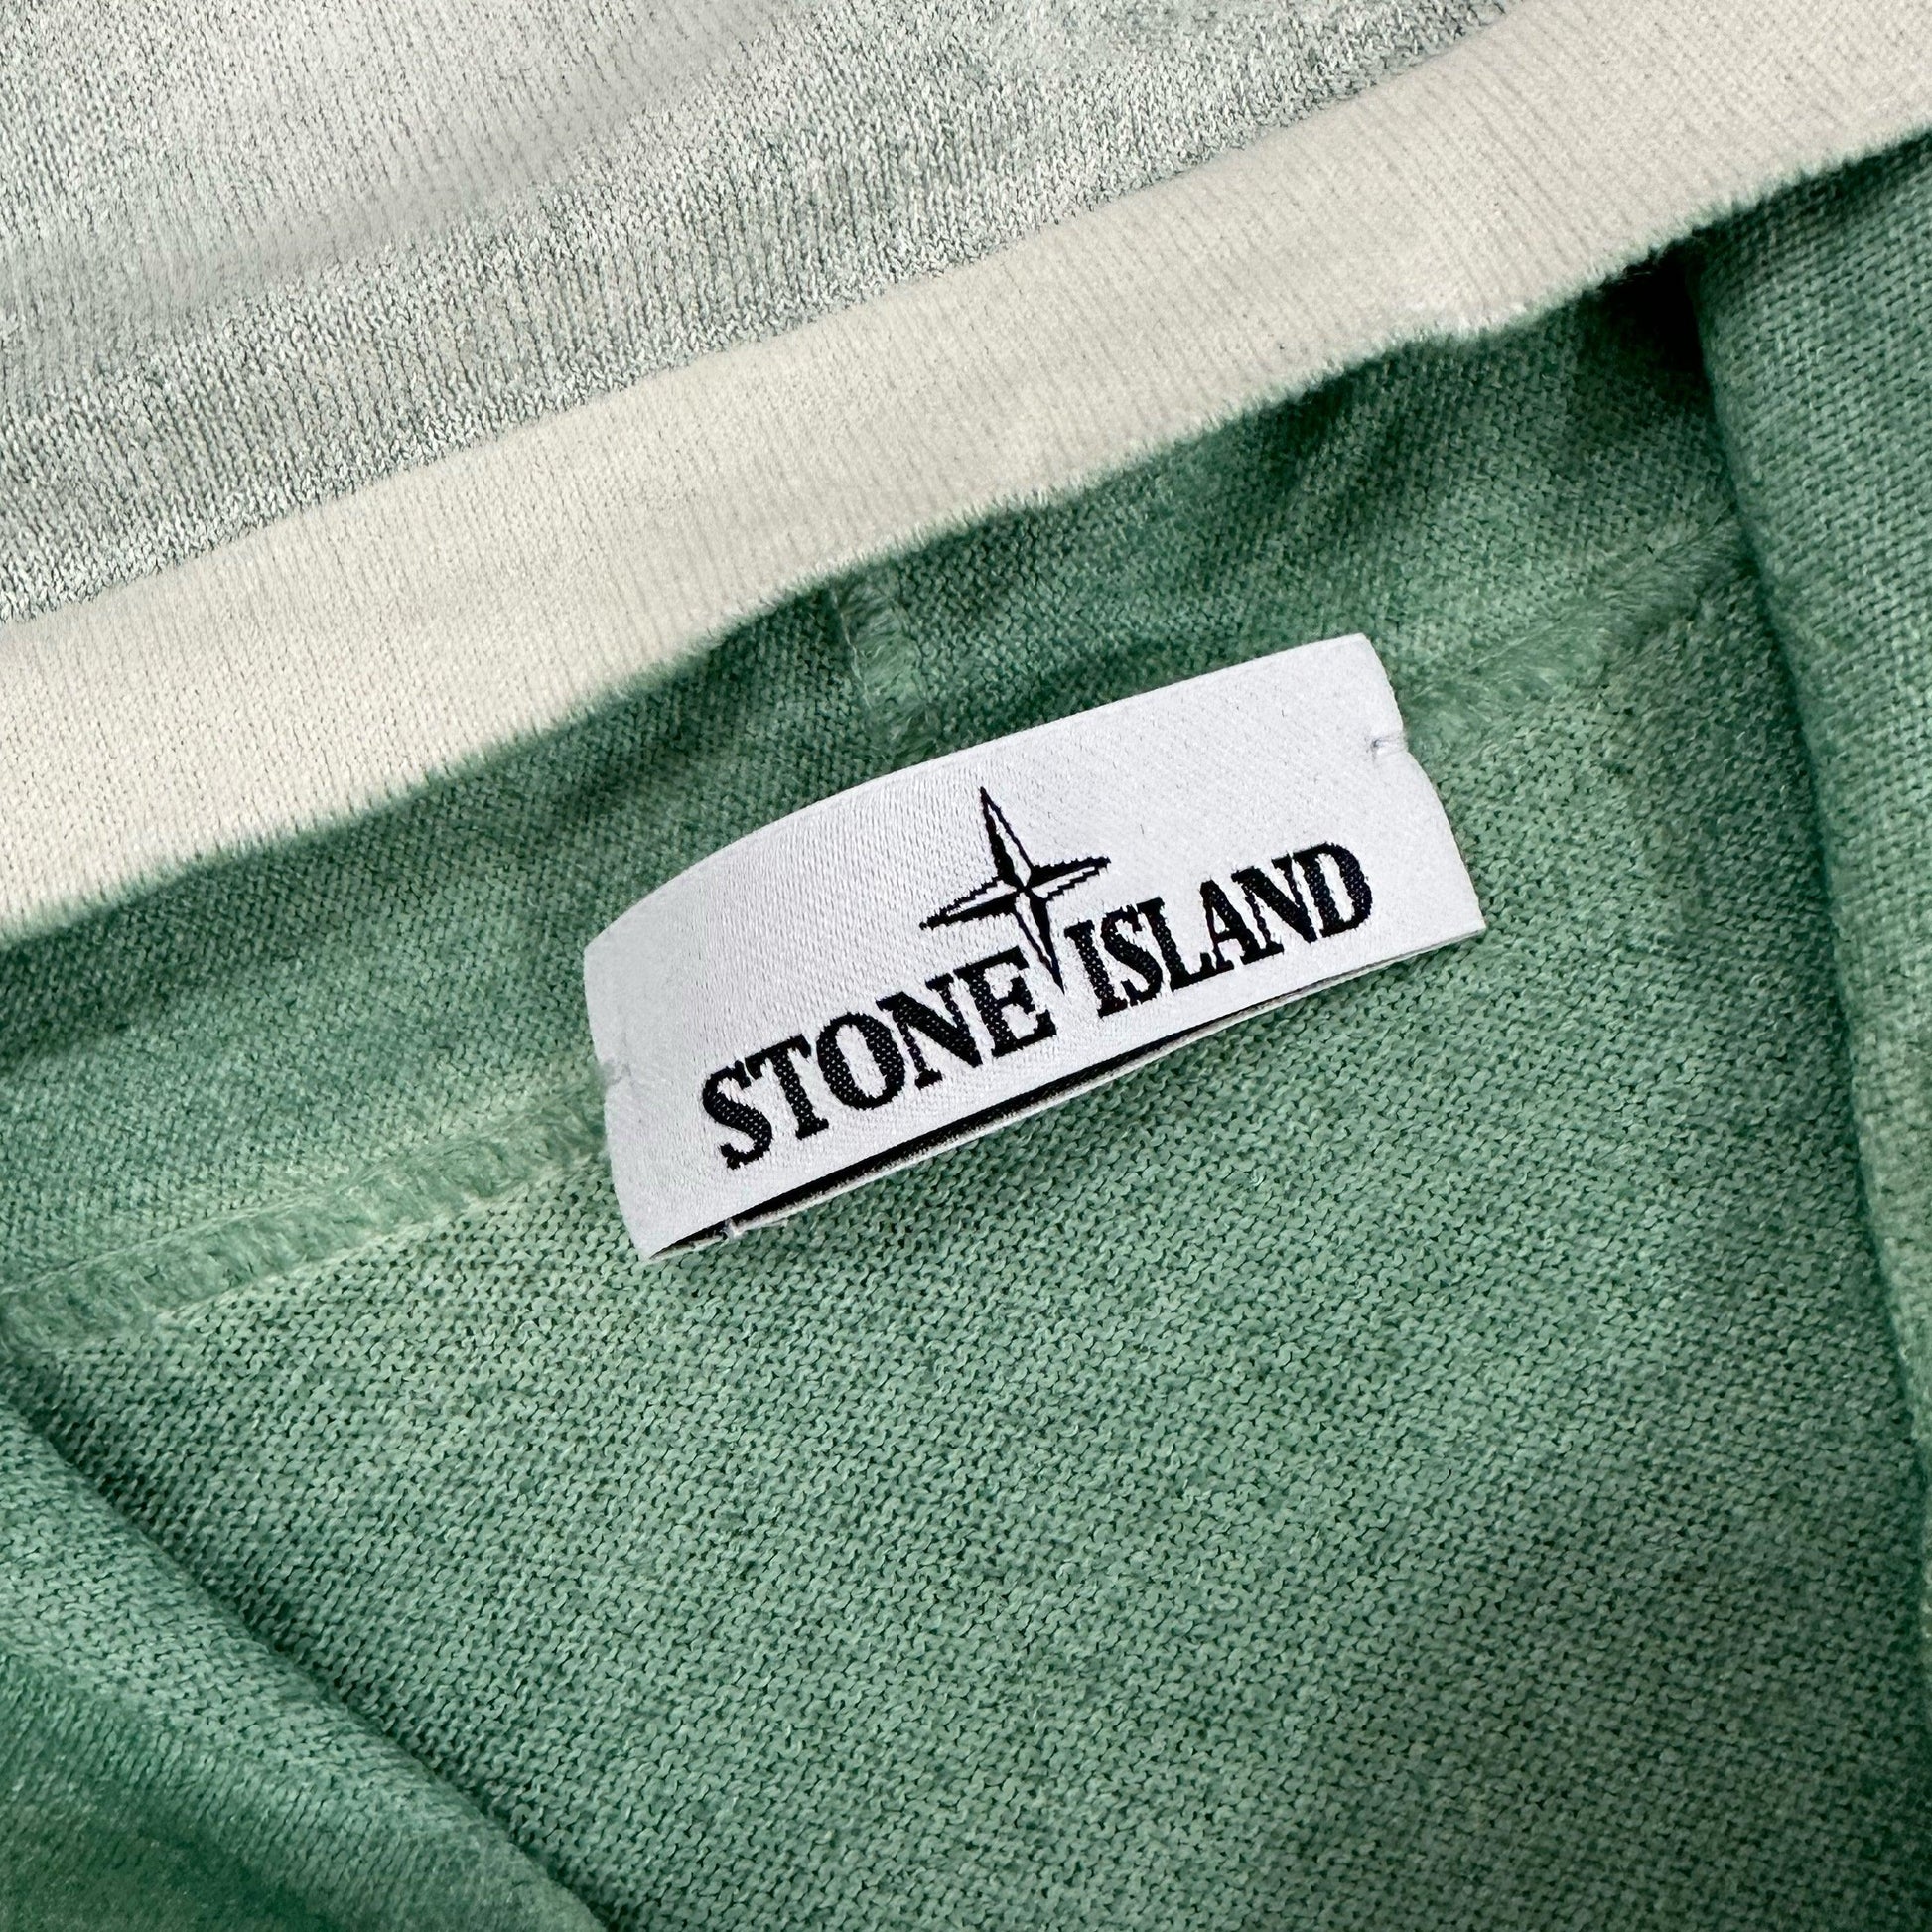 Stone Island Hand Spray Pullover Thin Hoodie - Known Source